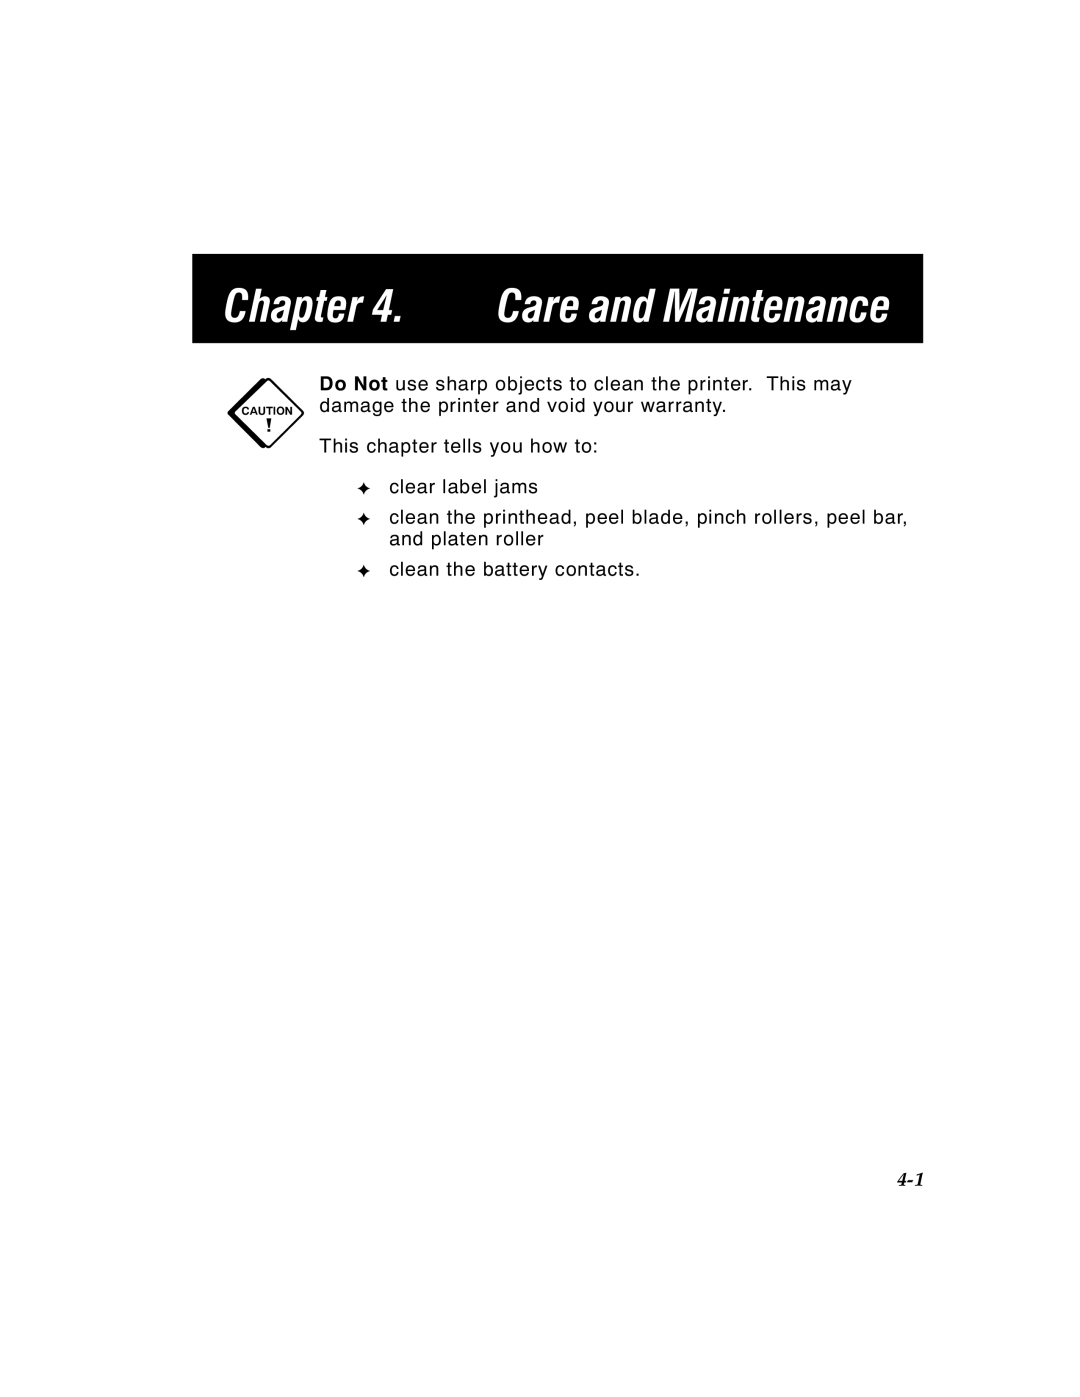 Paxar 4 manual Care and Maintenance, This chapter tells you how to clear label jams, clean the battery contacts 